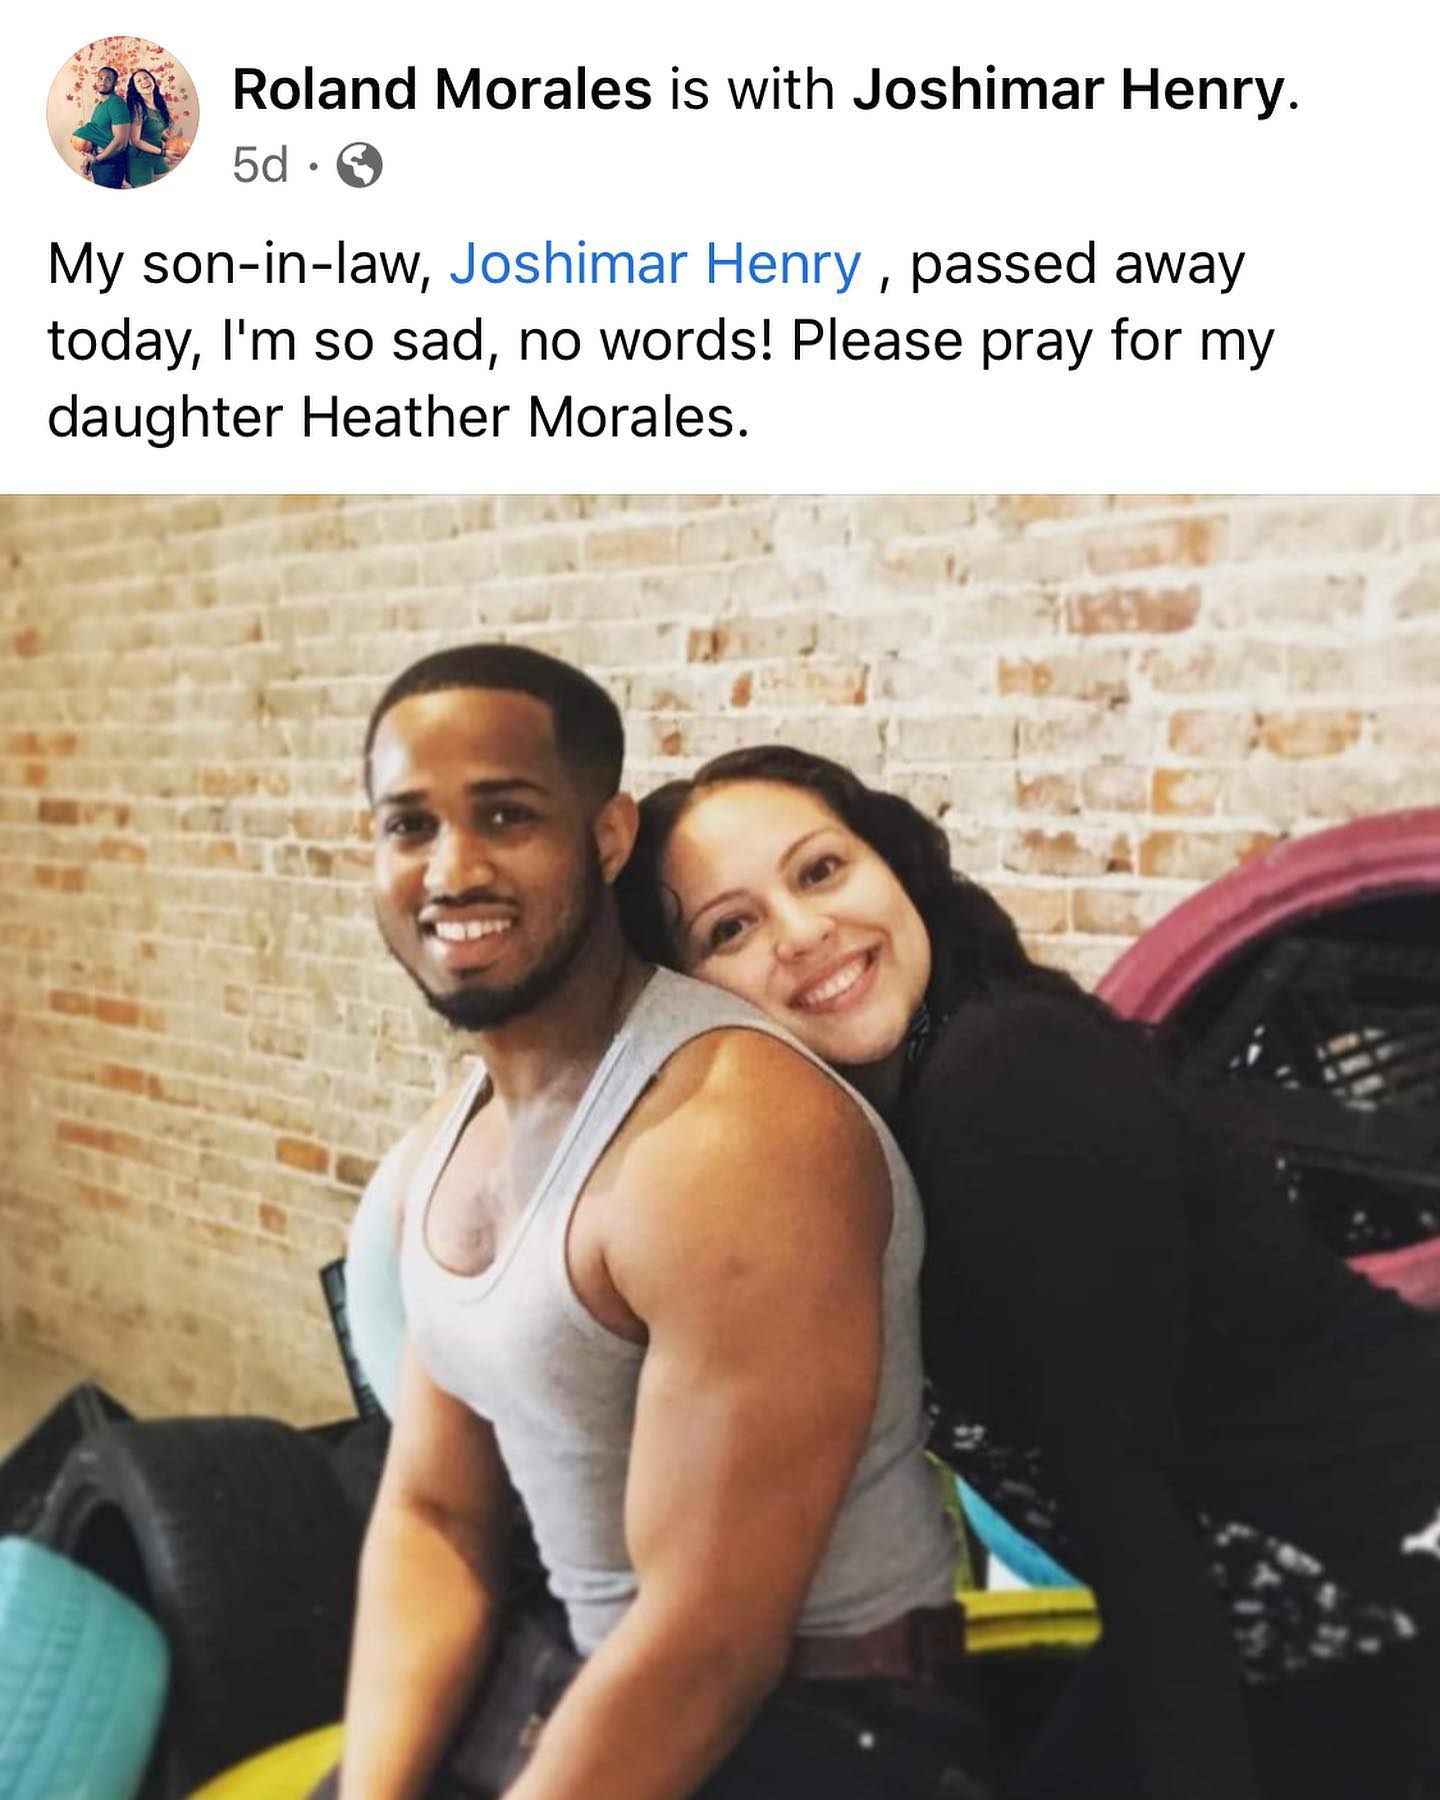 Healthy 27-Year-Old Chicago Doctor DEAD 3 Months Following COVID Shots Raising Long-term Safety Concerns Dr.-Joshimar-Henry-FB-post-father-in-law